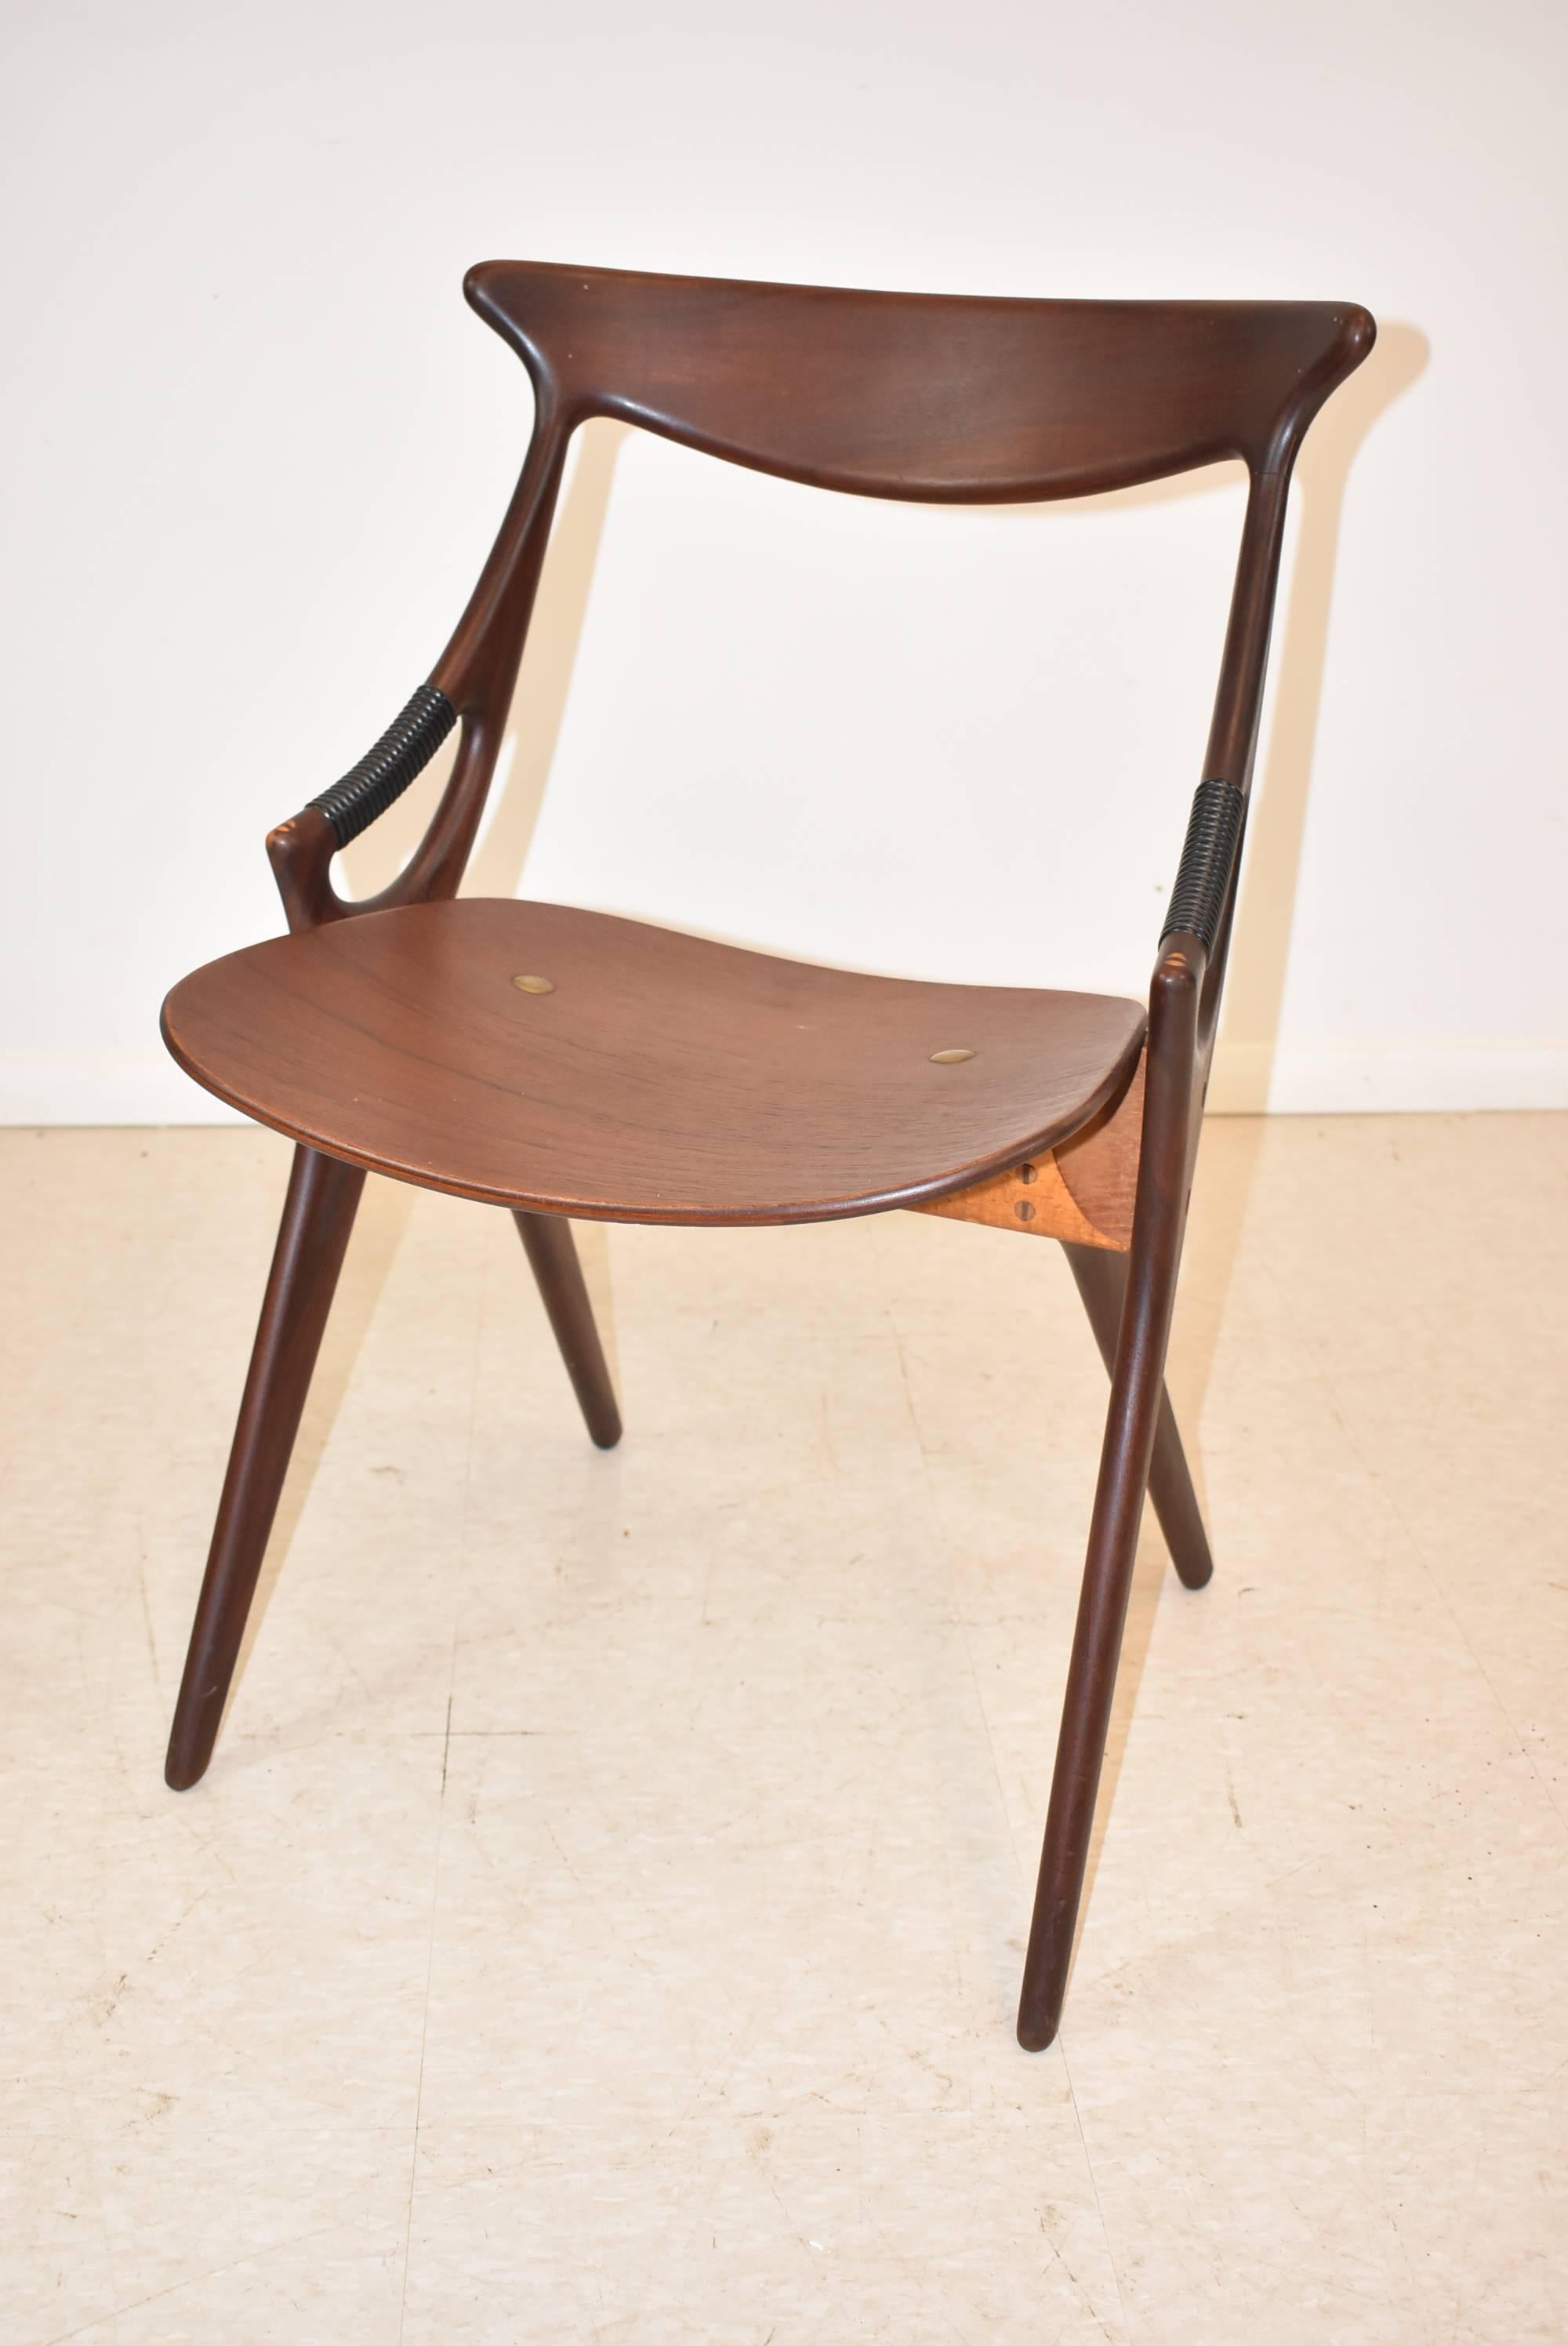 A park of Model 71 Chairs by Arne Hovmand Olendm, (Denmark 1919-1989) for Mogens Kold Mobelfabrik, circa 1950s. These chairs have a unique shape with the most amazing teak arms with wrapped arm supports and bent plywood seats. The chairs have subtle